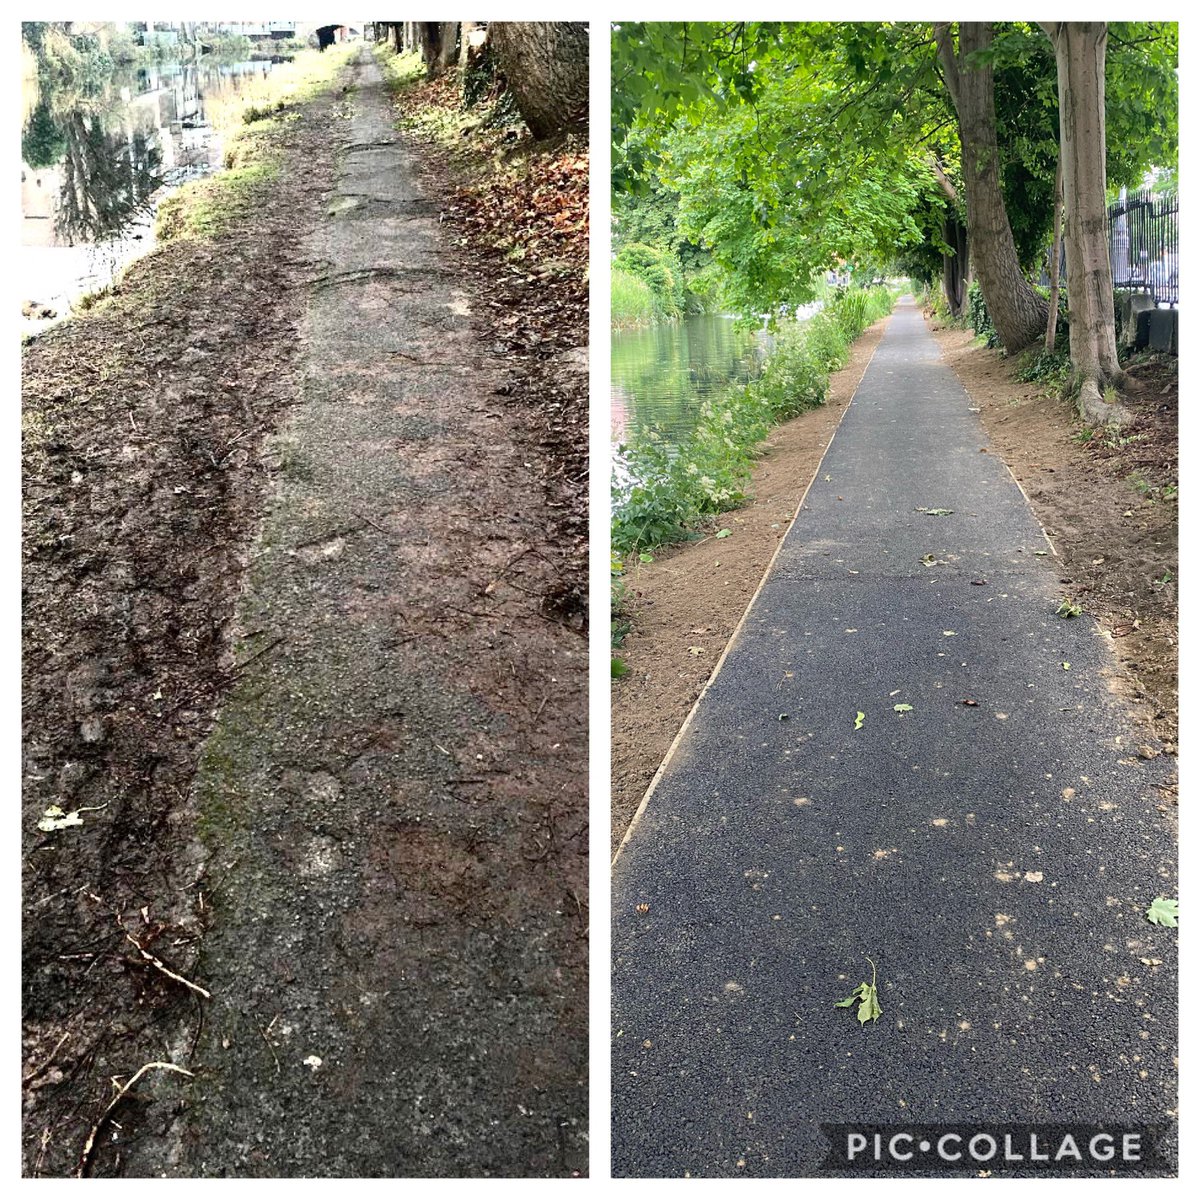 A very welcome path renewal by #WaterwaysIreland on the #GrandCanal-previously a single file tarmac path with muddy overtaking lane now a superhighway-compacted gravel would have had a better environmental impact but hey this is still a major improvement and no roots to trip over